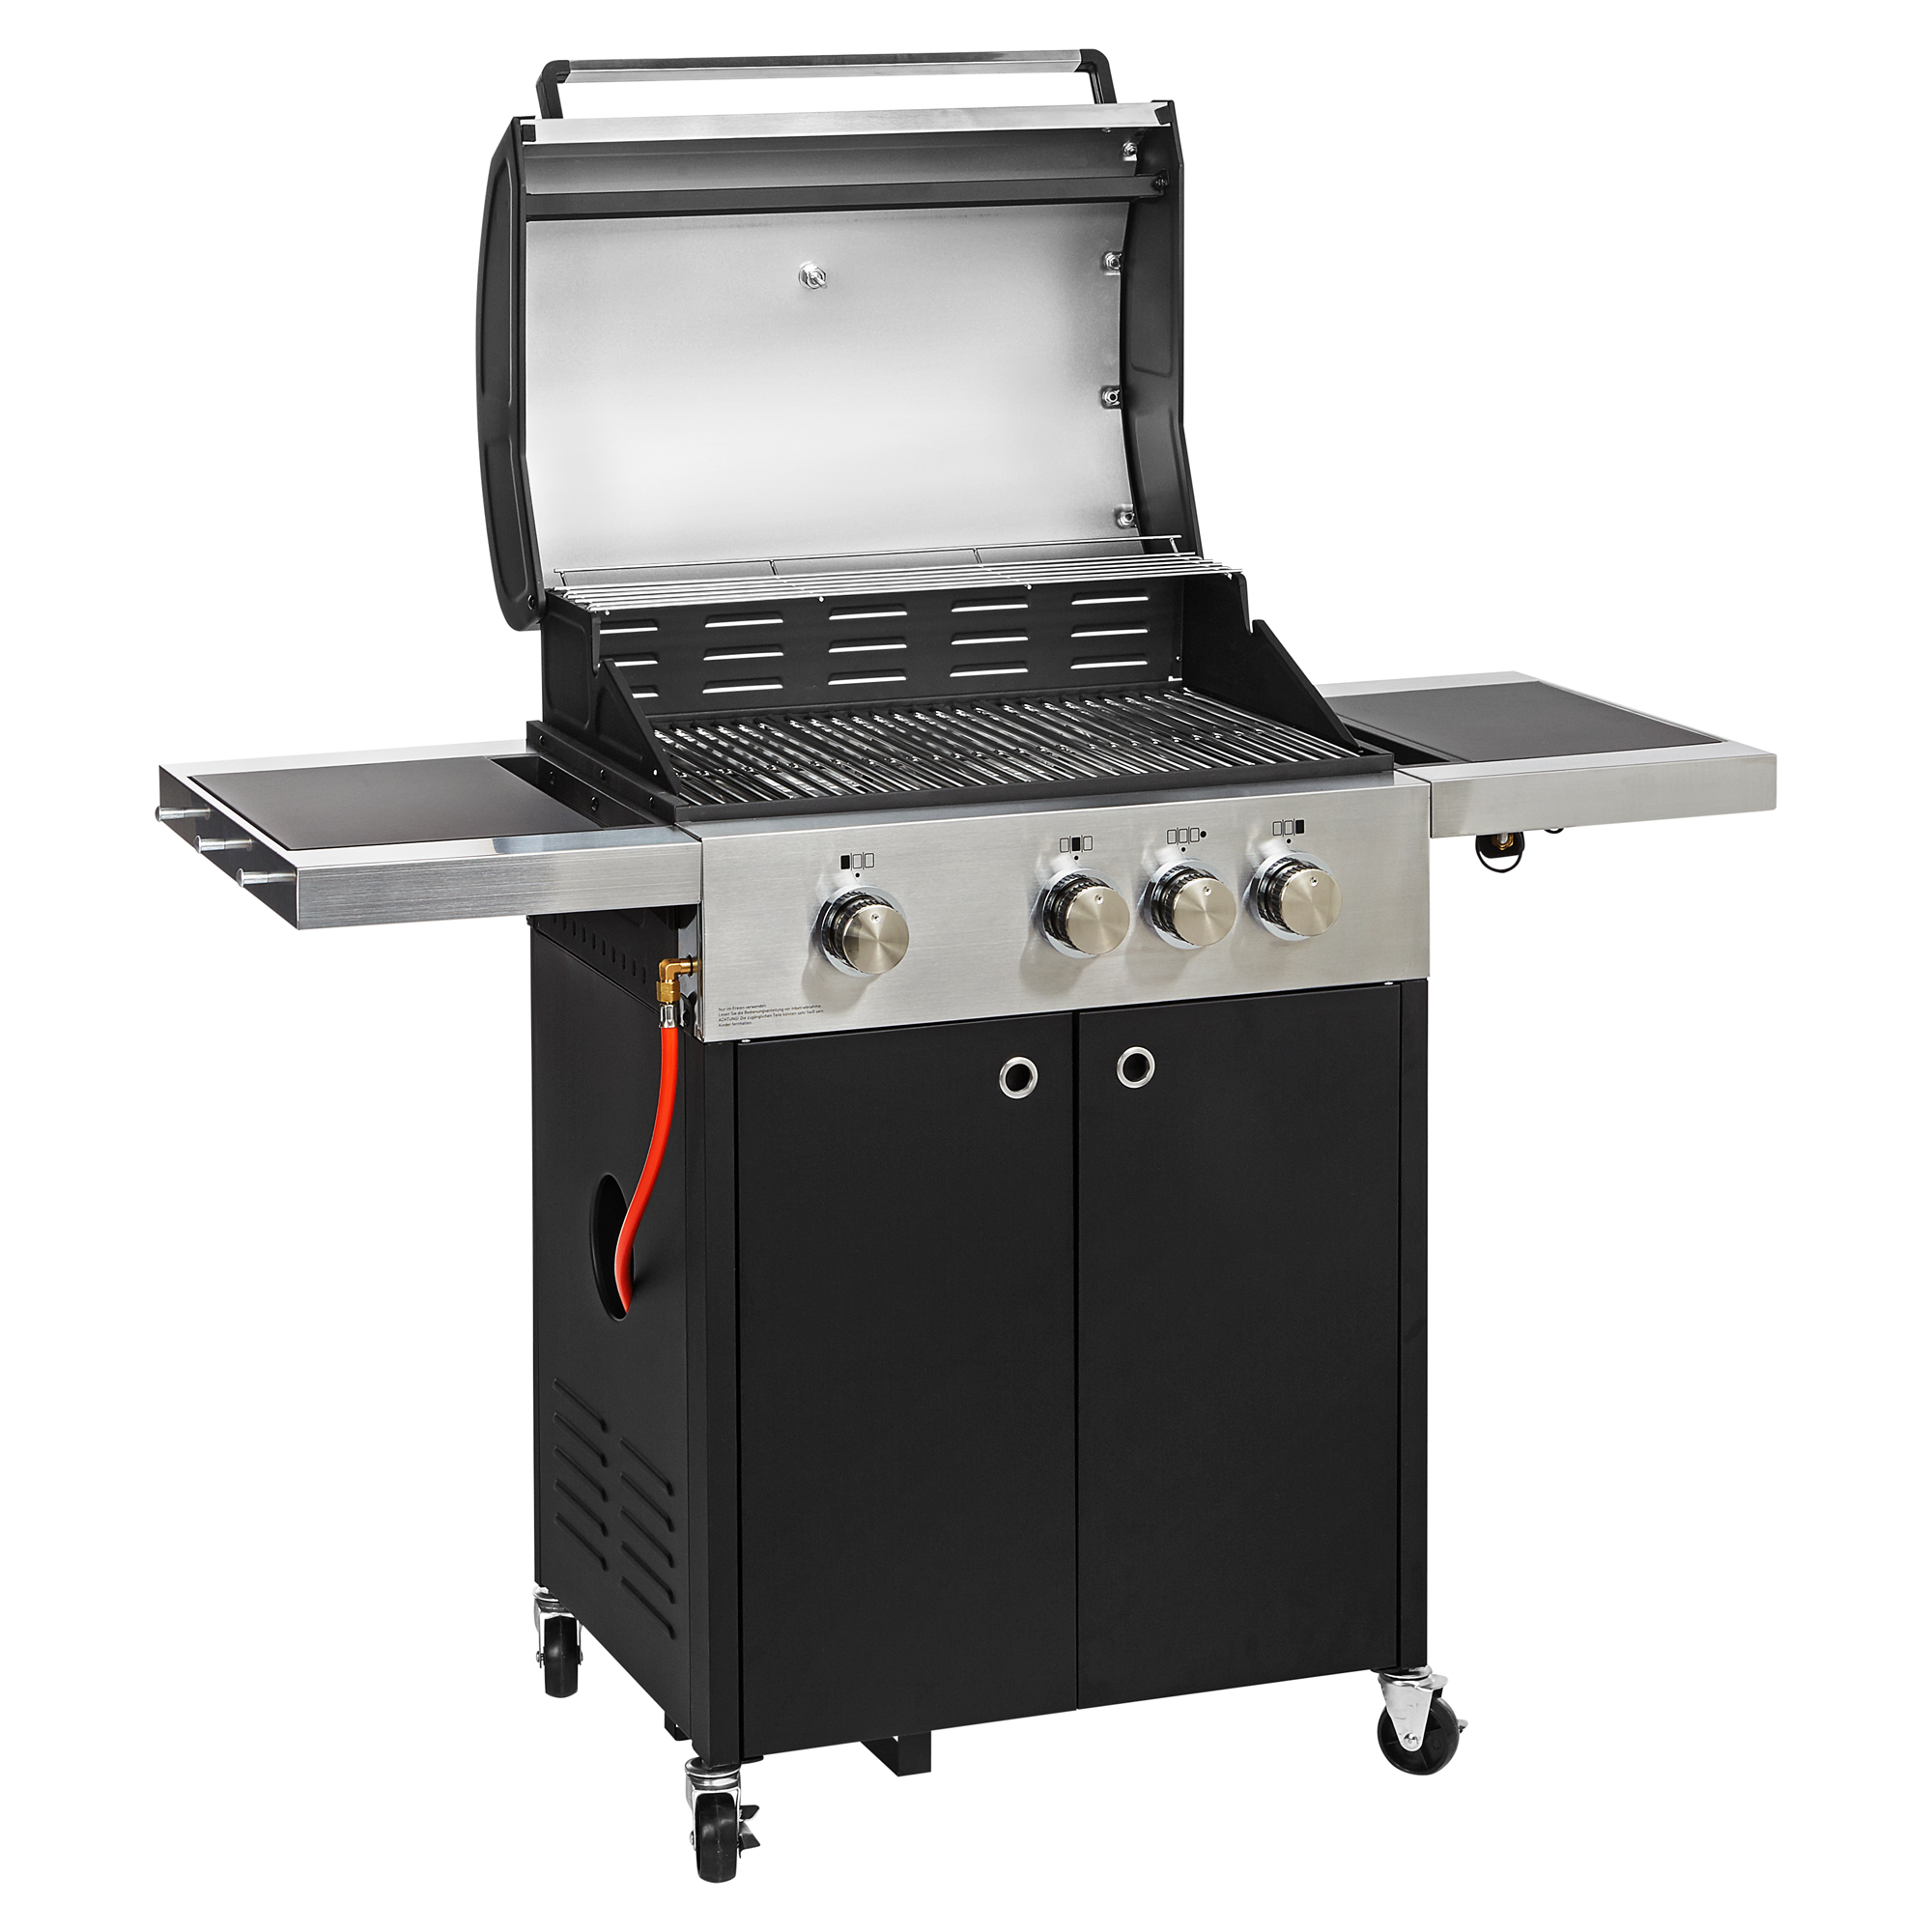 Gas-Grillküche Premium, 4 Brenner + product picture